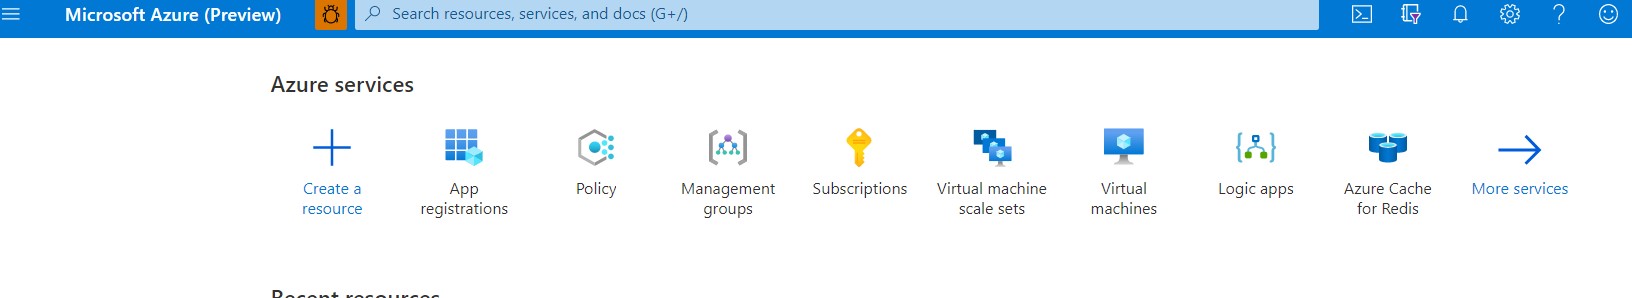 Screenshot of resources available in the Azure portal, including app registrations.